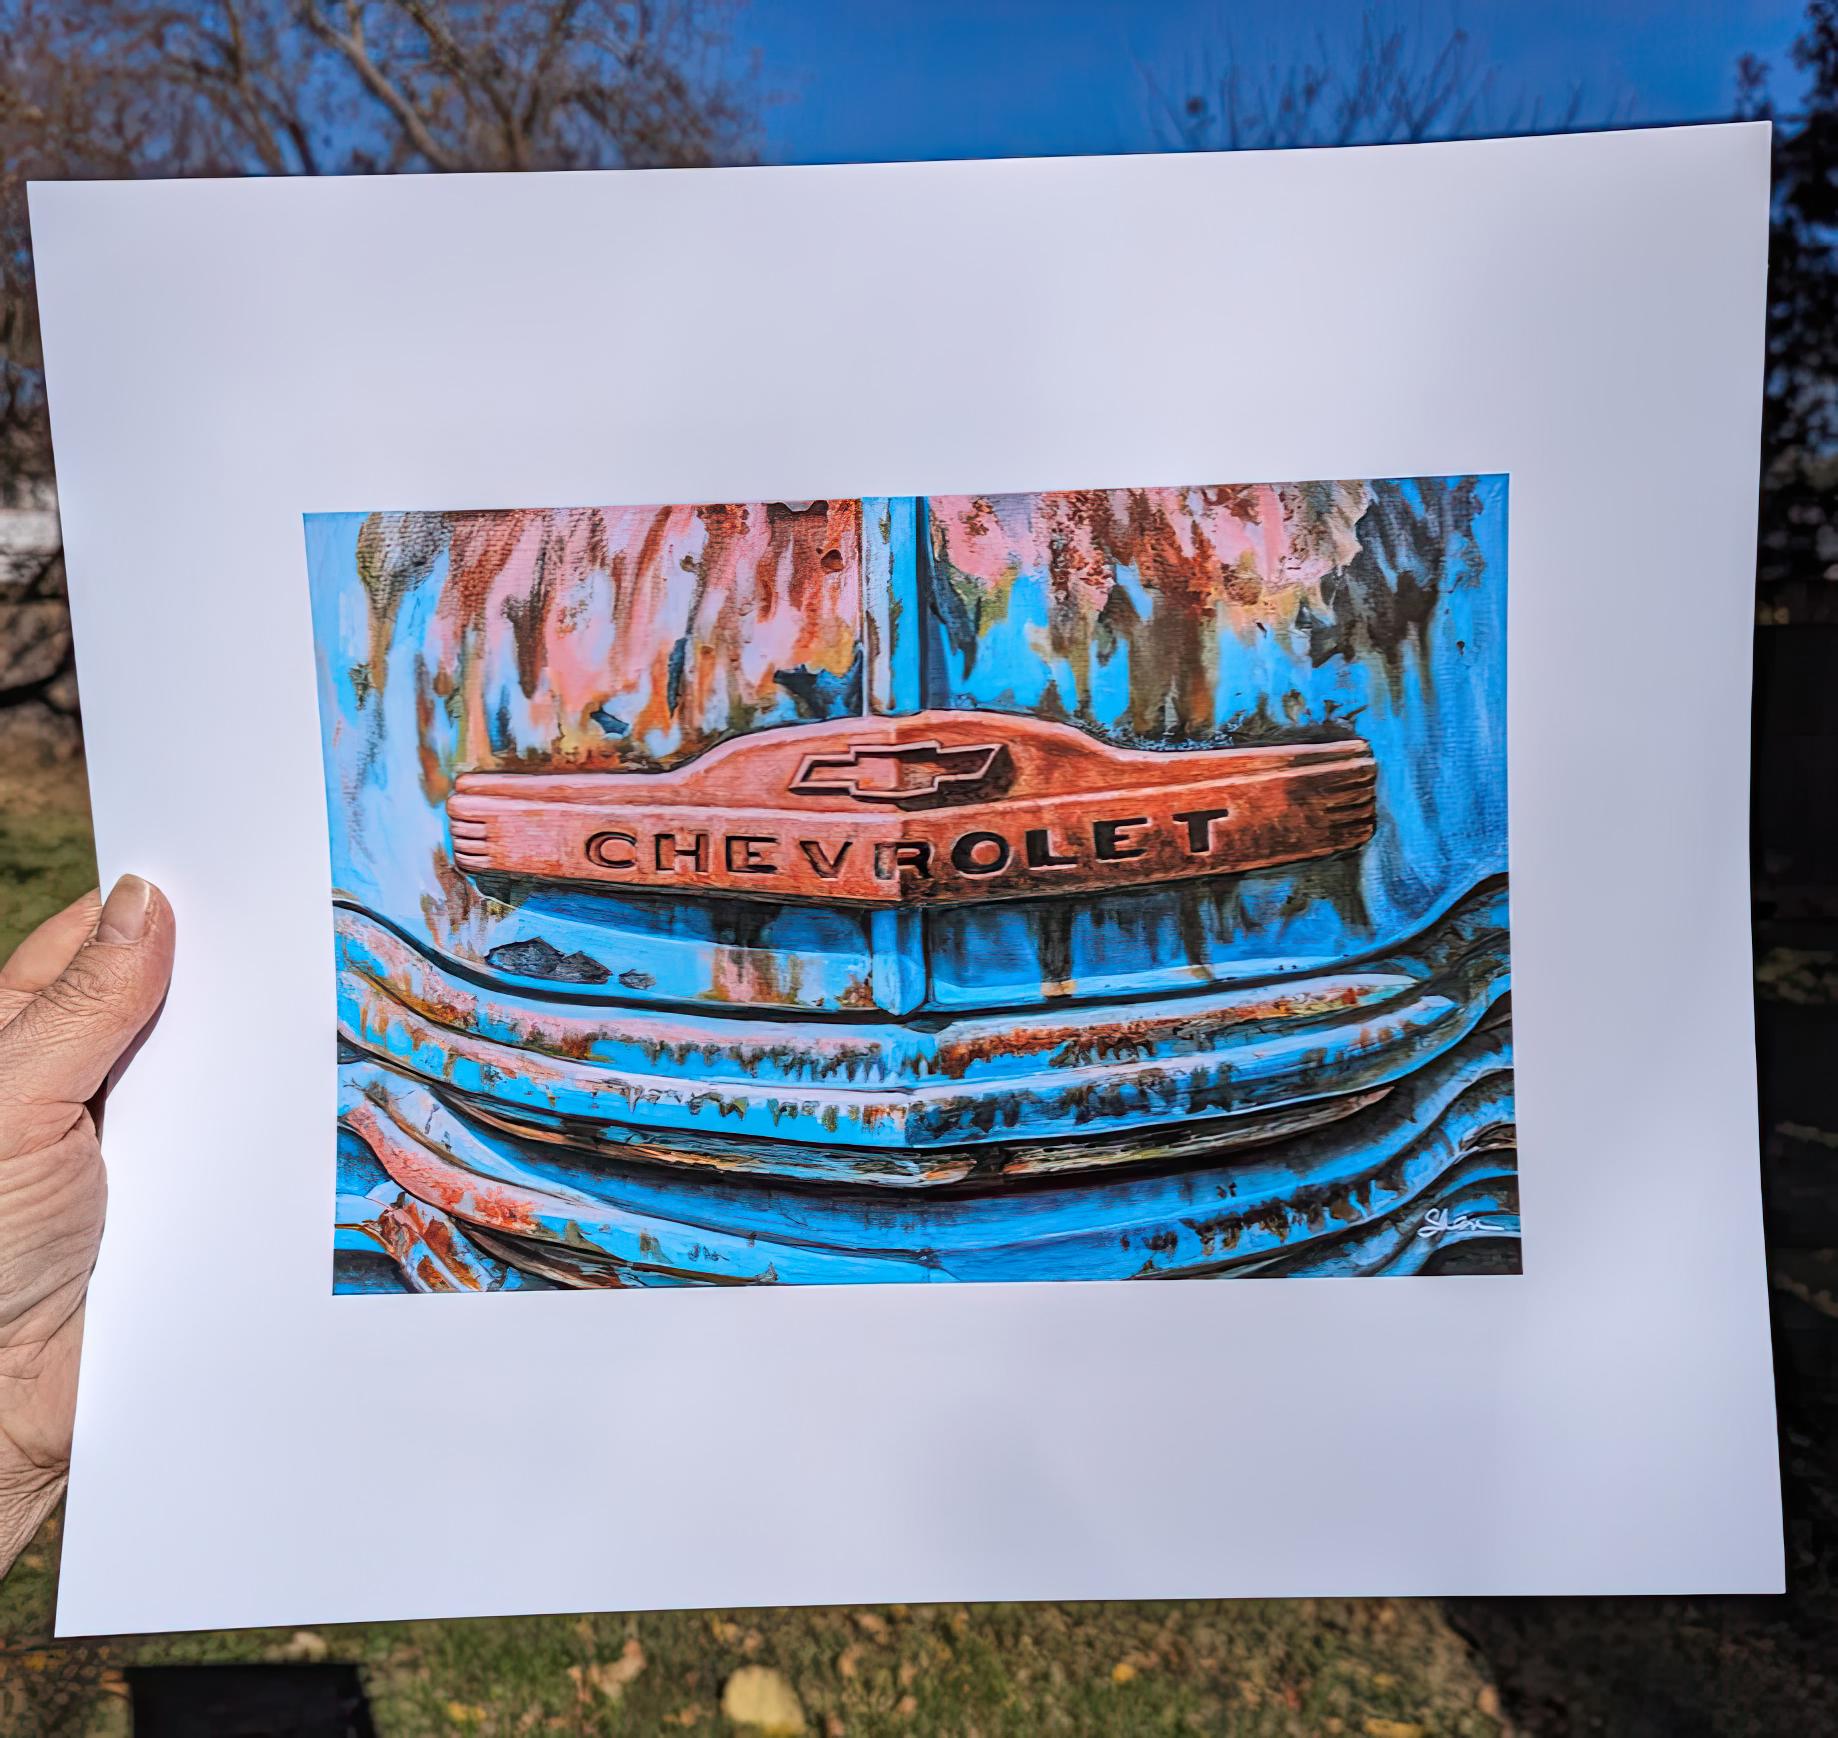 Shan Fannin Figurative Print - "Rusted Glory (Chevy Truck)" Limited Edition Giclée Print